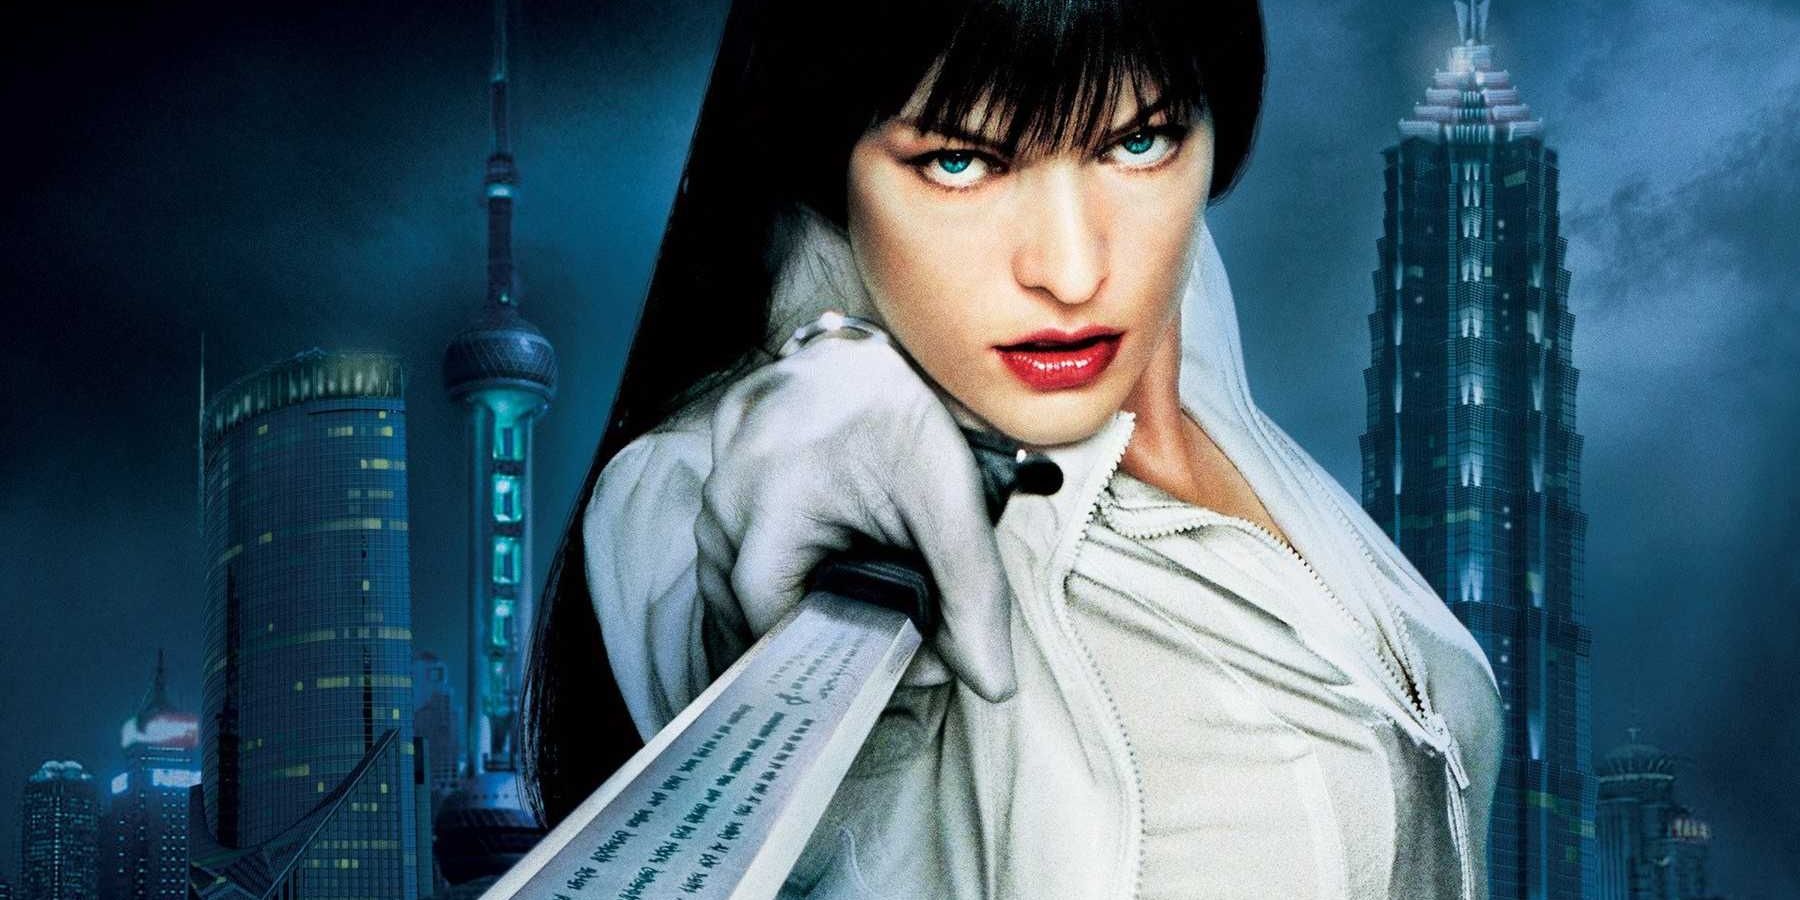 The 10 Worst SciFi Action Movies Of The 2000s (According to IMDb)